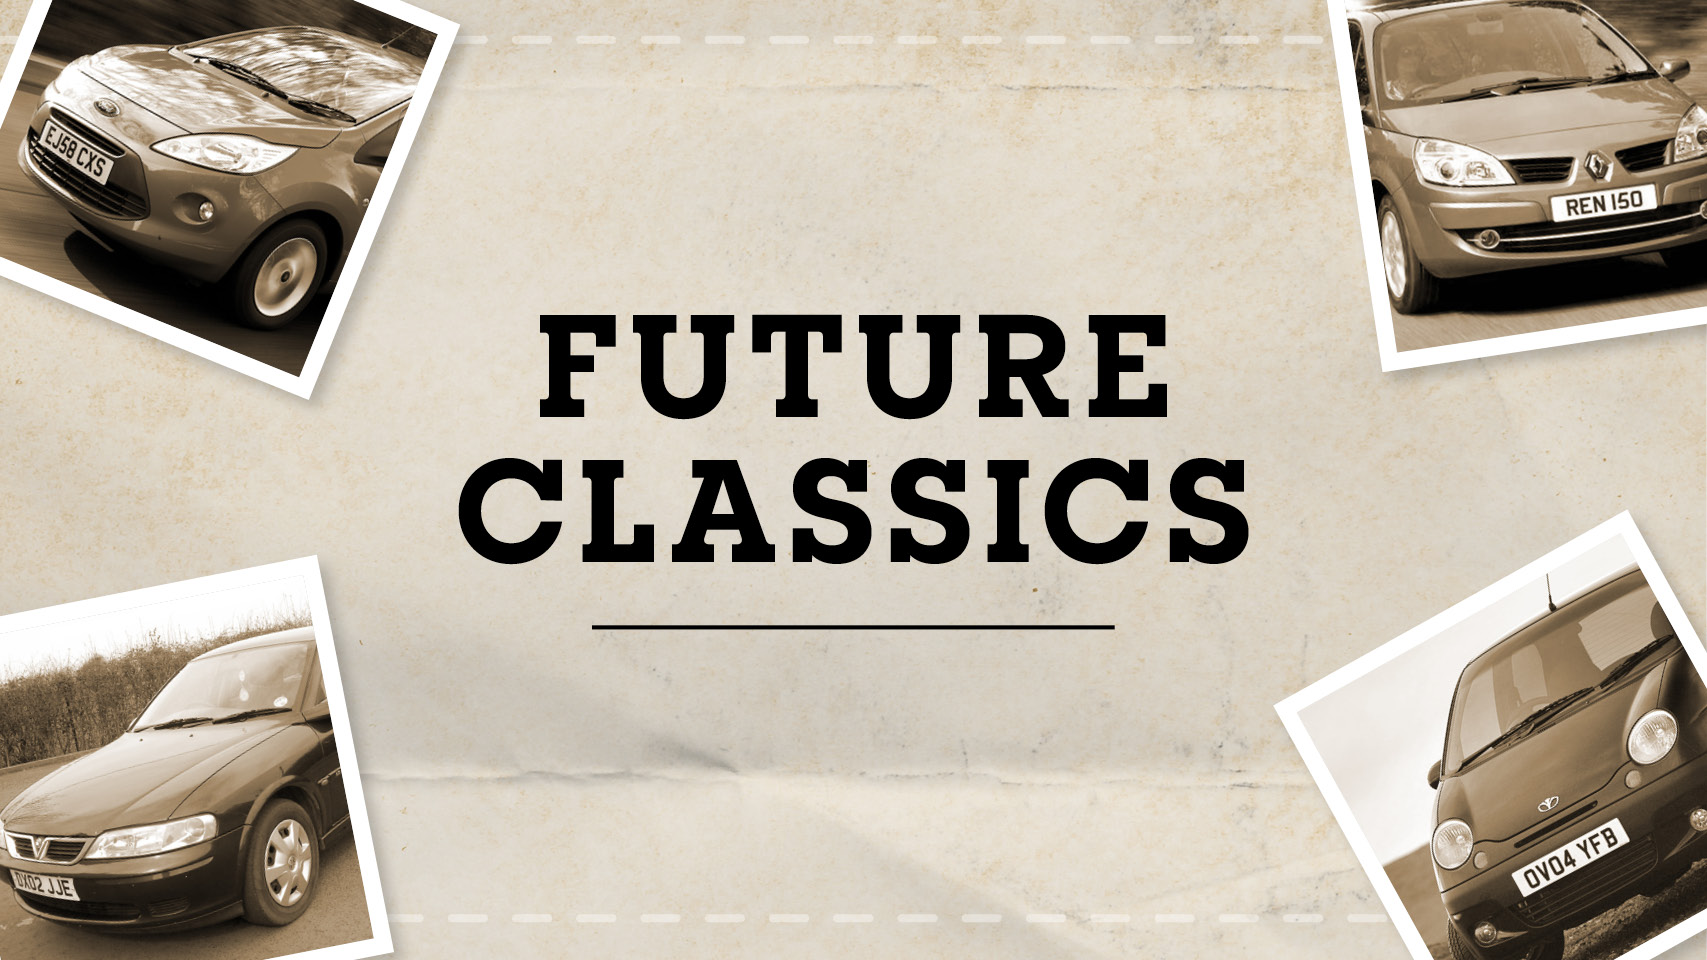 Future classics: predicting the rarest and most classic cars by 2030